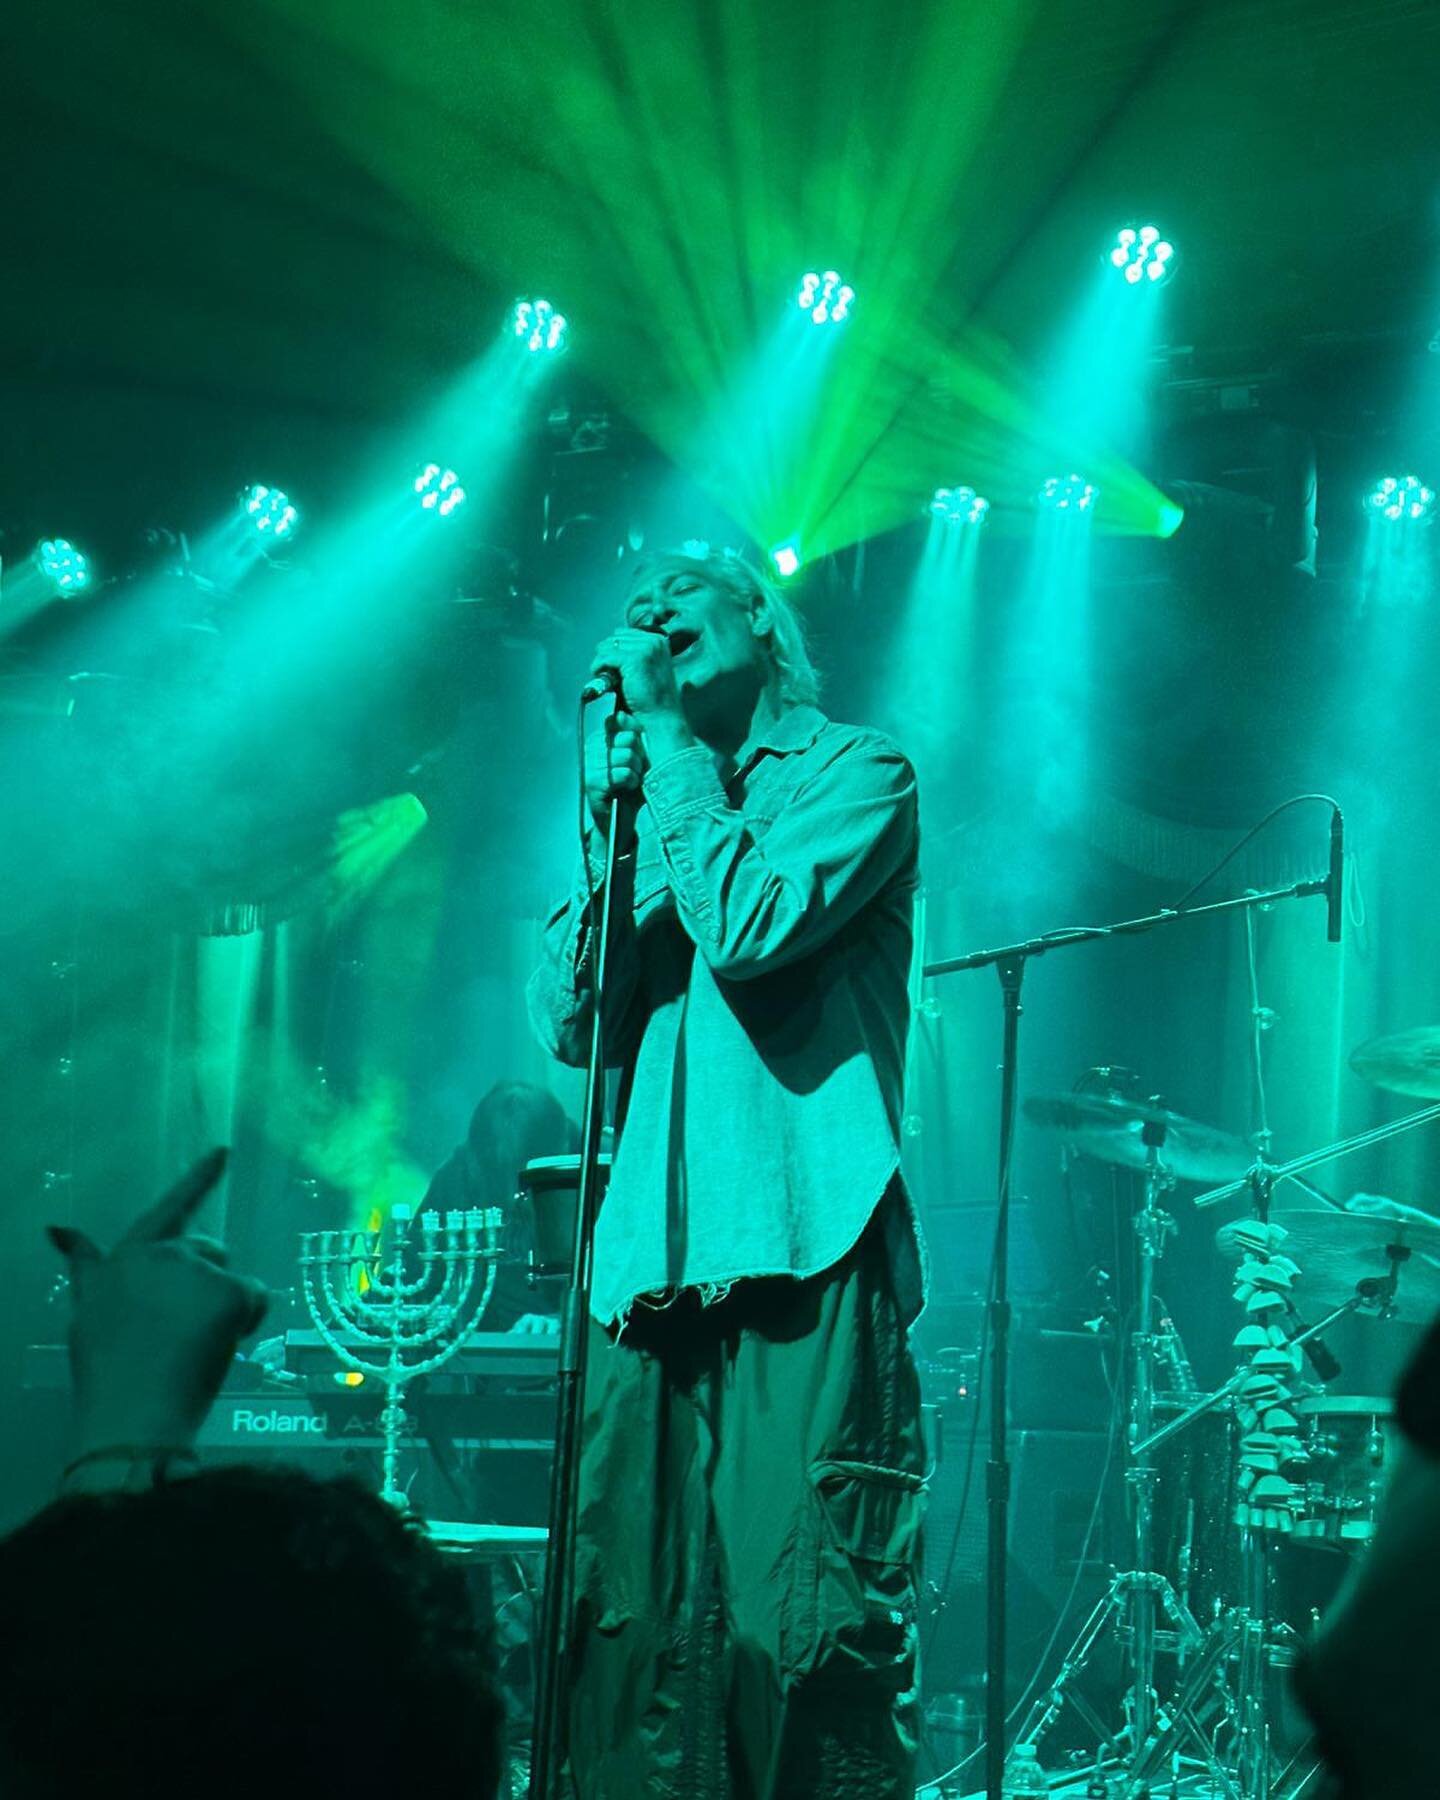 2 sold out shows with the #goat @matisyahu 😎🦔💪! May we be blessed to continue spreading the light for yearz to come. Shabbat shalom and happy Hanukkah to all 🔥!
.
.
.
#bkbowl #experience #show #matisyahu #brooklyn #livemusic #concert #life #joy #